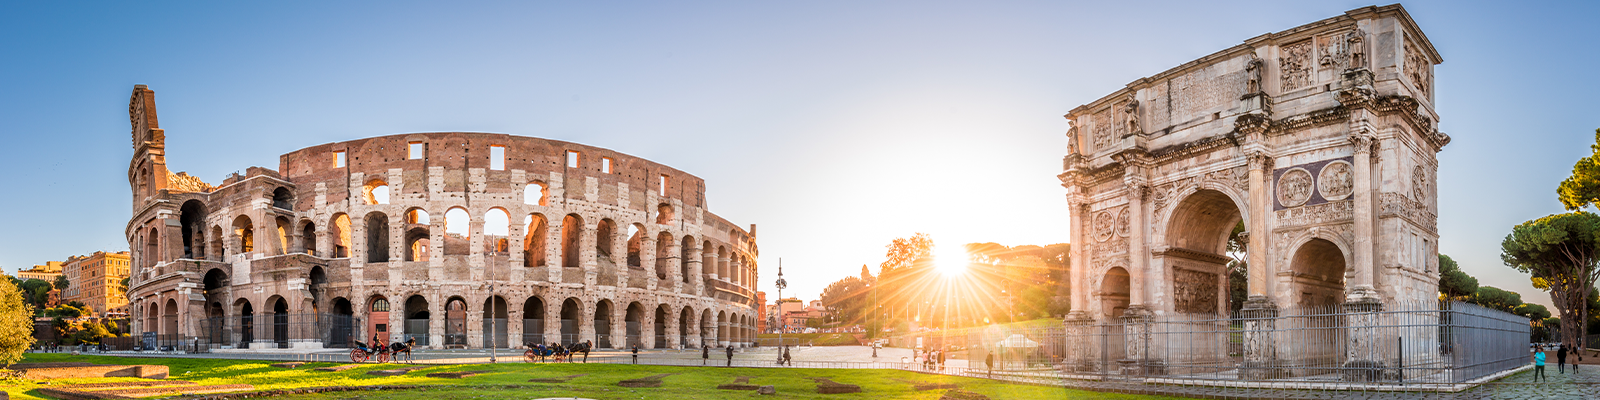 Panoramic view of Colosseum and Constantine arch at sunrise. Rome, Italy